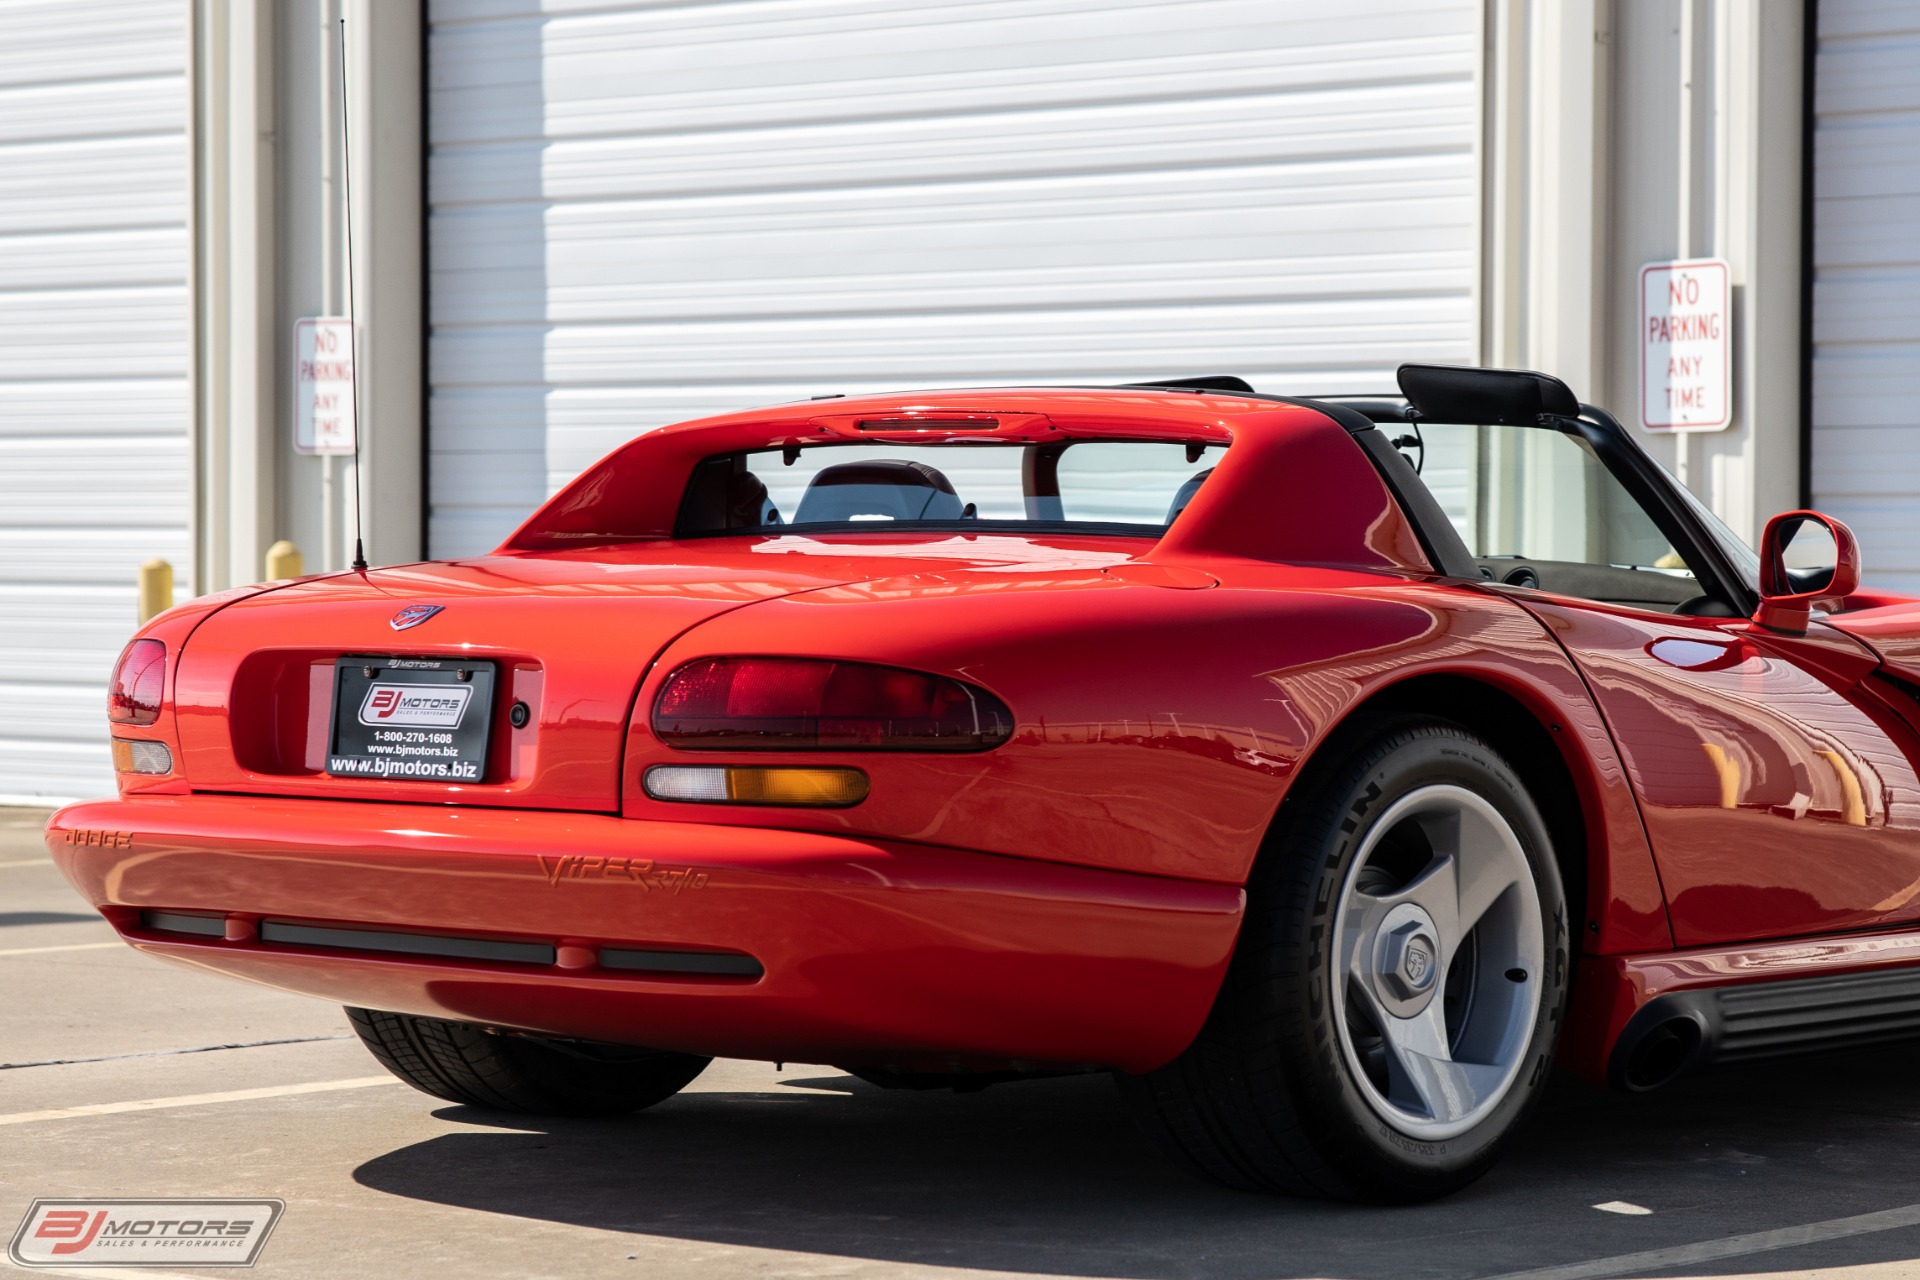 Used-1992-Dodge-Viper-RT/10-with-83-miles